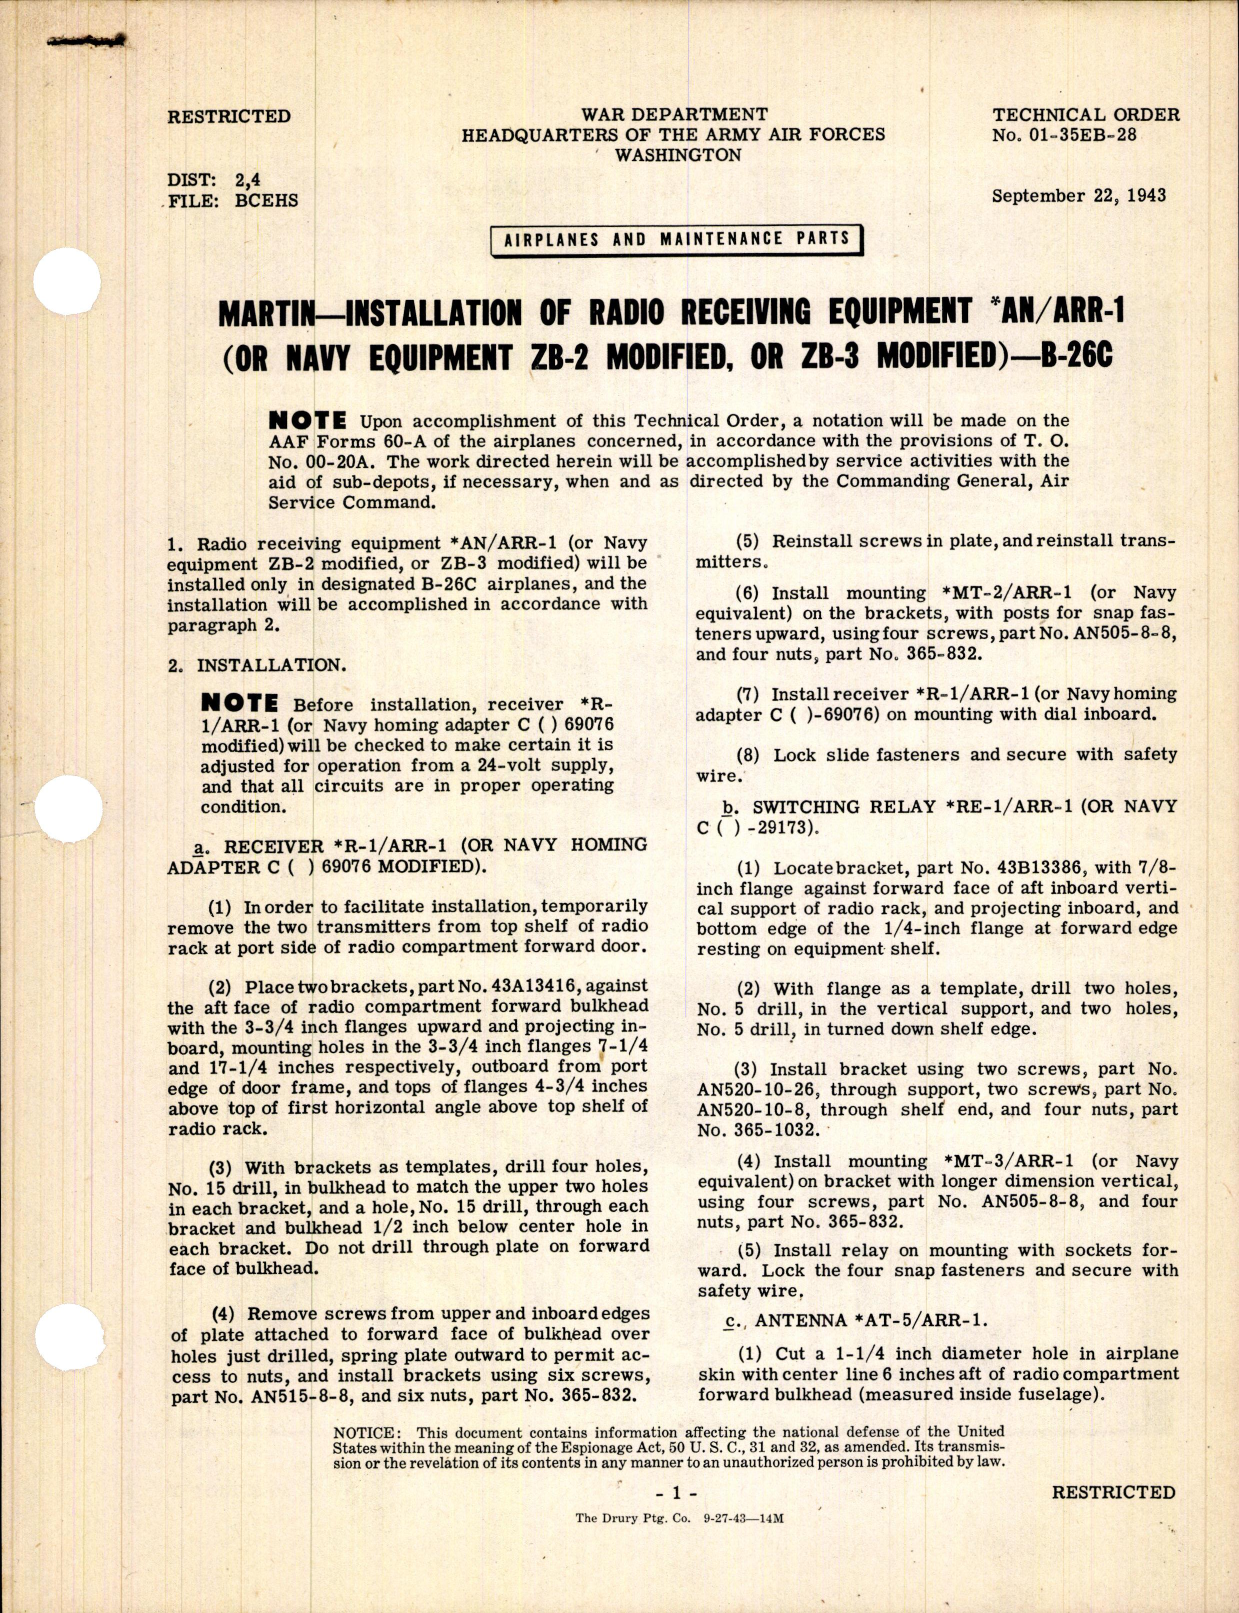 Sample page 1 from AirCorps Library document: Installation of Radio Receiving Equipment AN/ARR-1 for B-26C